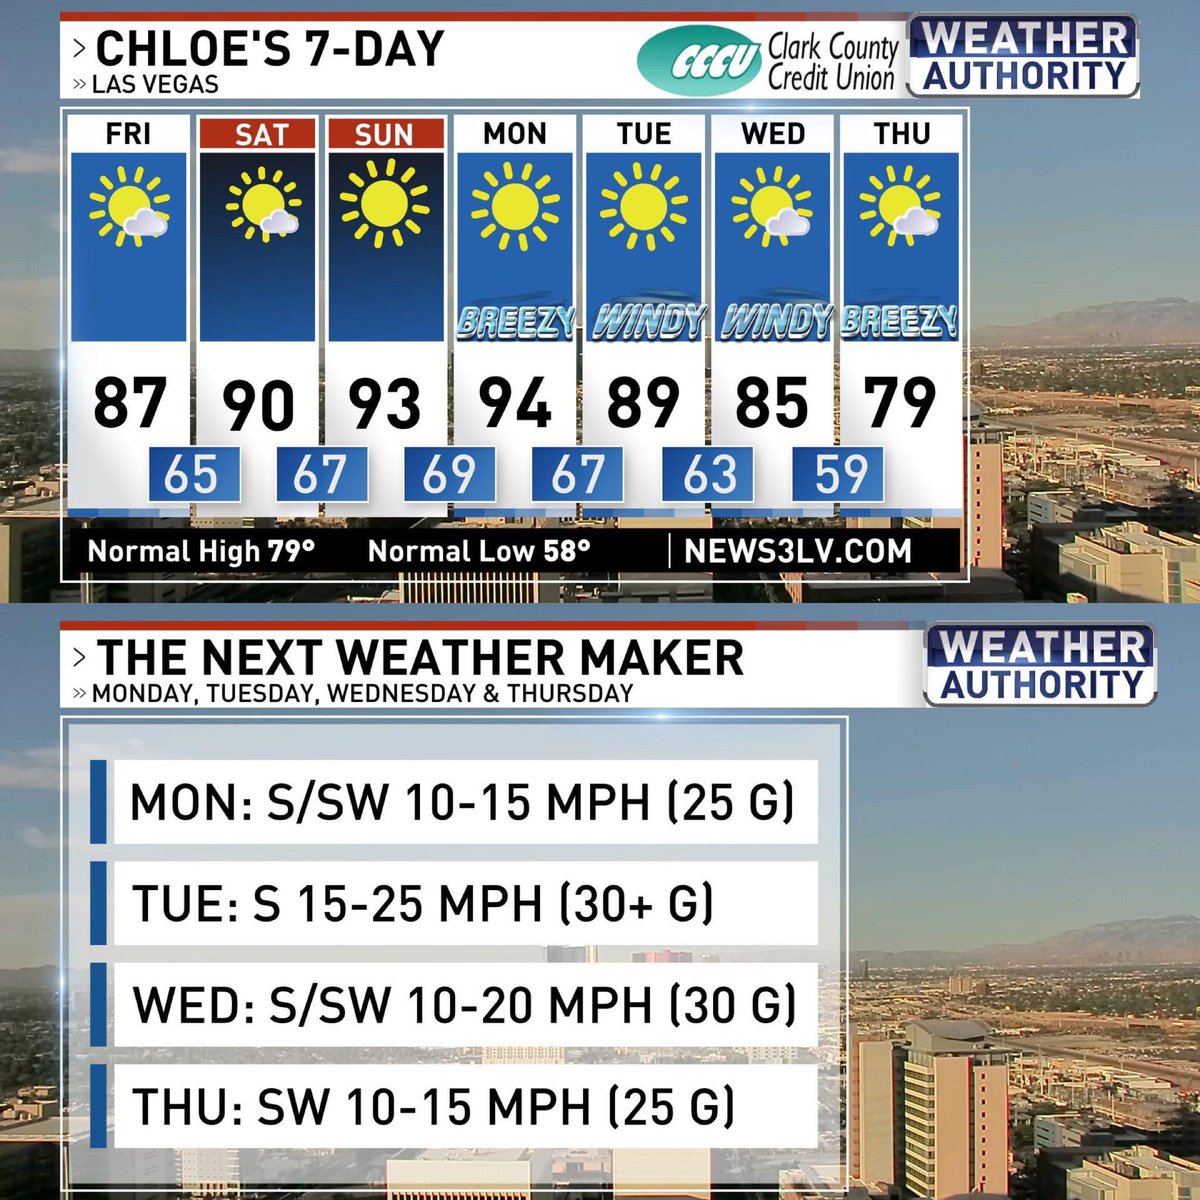 Get ready for a warmer weekend followed by gusty winds next week! ☀️🥵💨 #WeatherAuthority #LasVegas #Chloes7Day